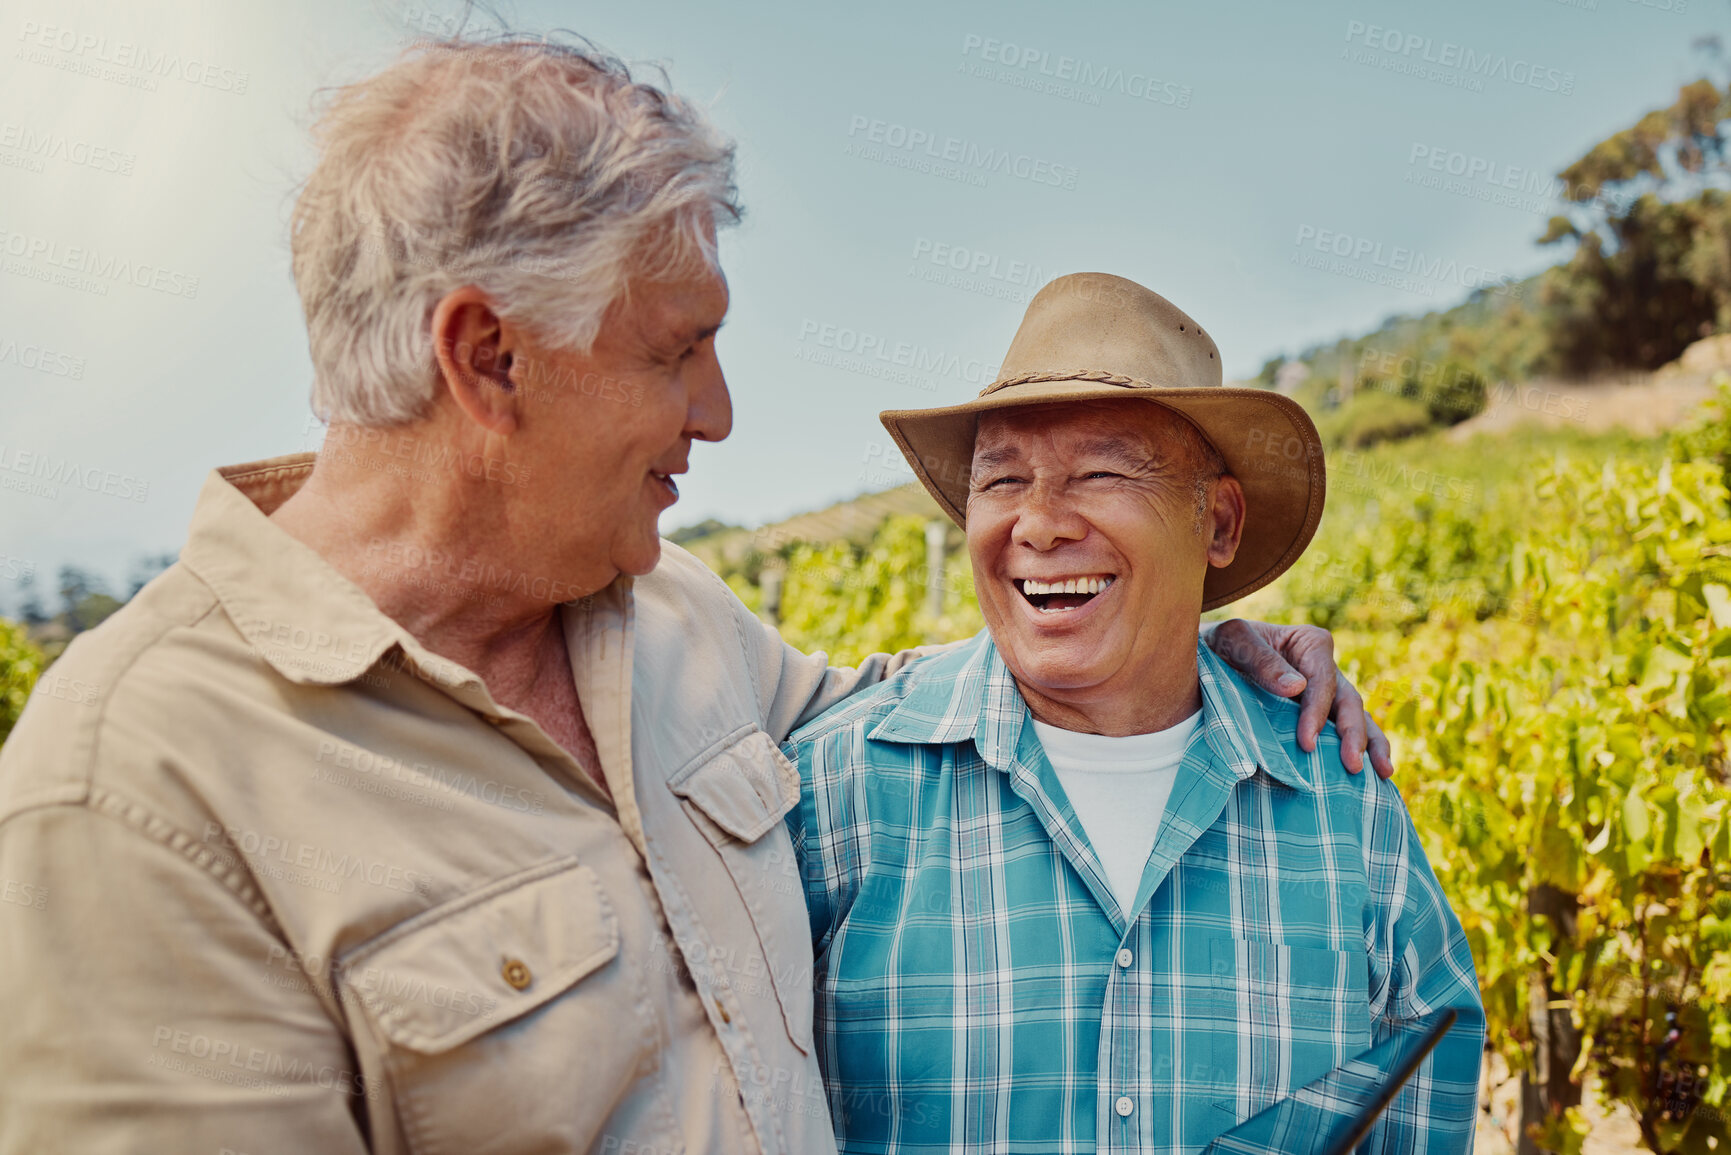 Buy stock photo Two happy senior farmers standing and embracing on their vineyard. Smiling elderly Caucasian and mixed race men and colleagues bonding and laughing together on a wine farm in summer before harvest